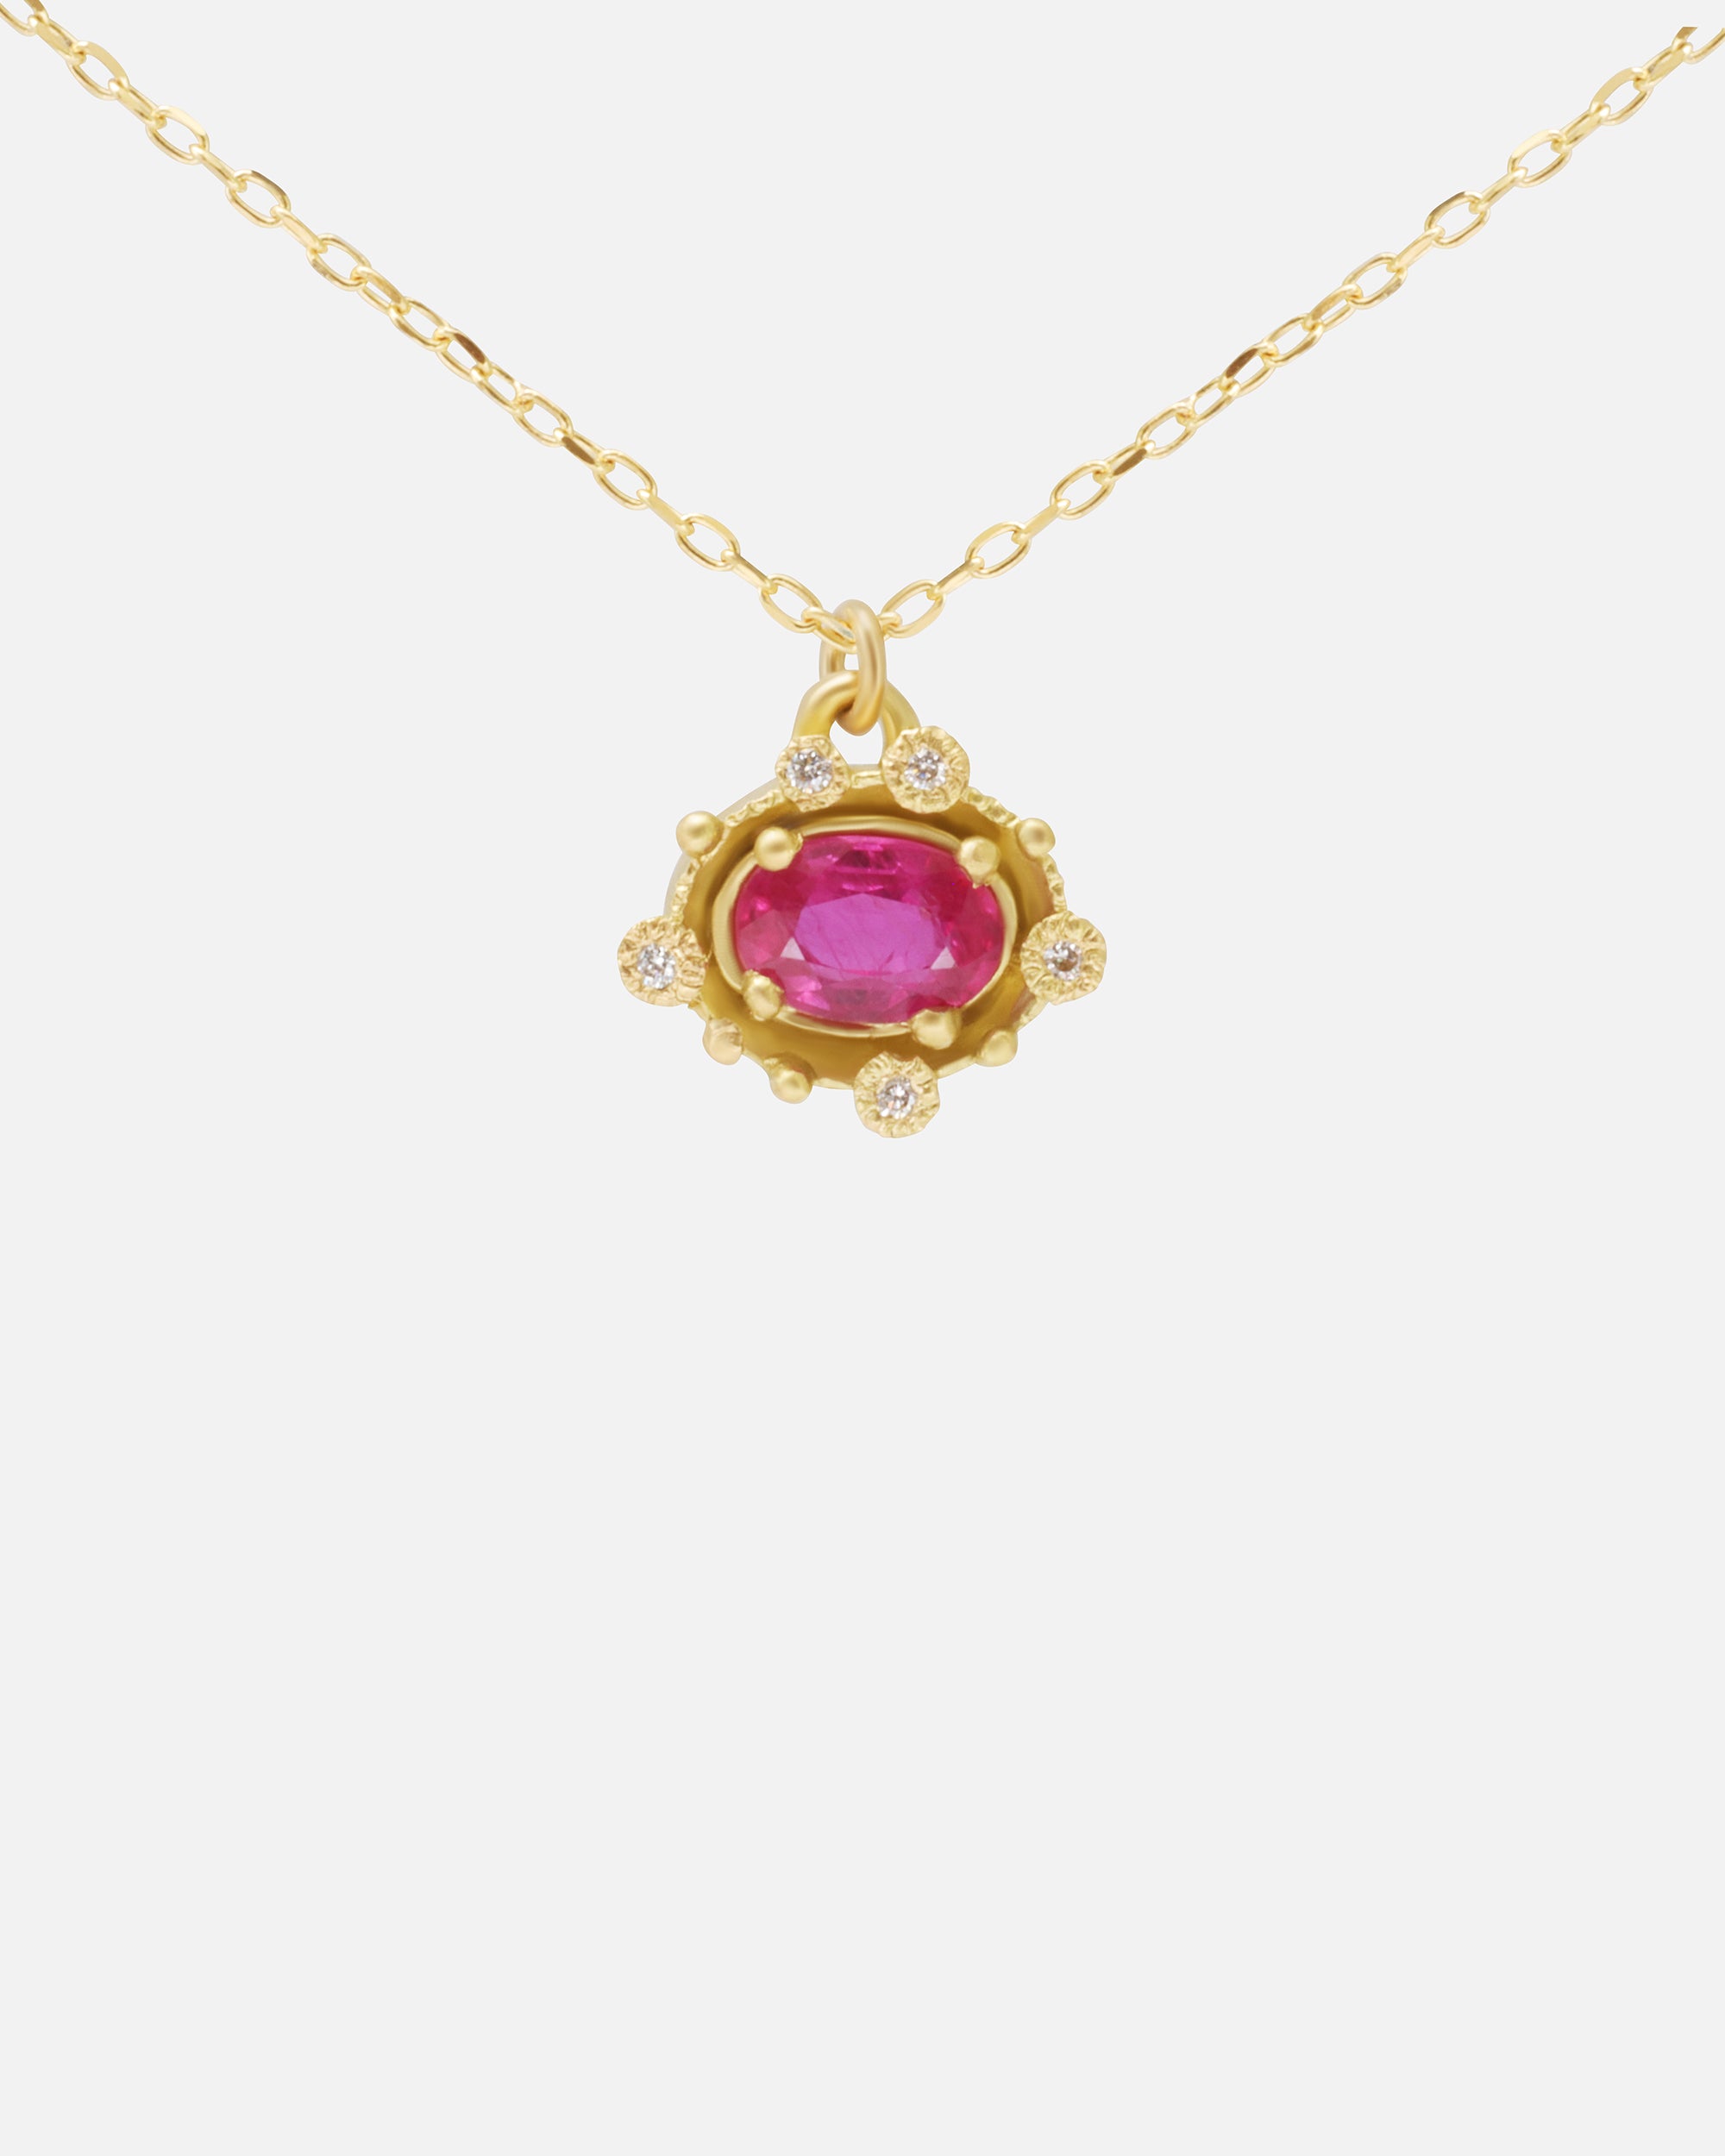 Melee Halo Pendant / Ruby By Hiroyo in pendants Category